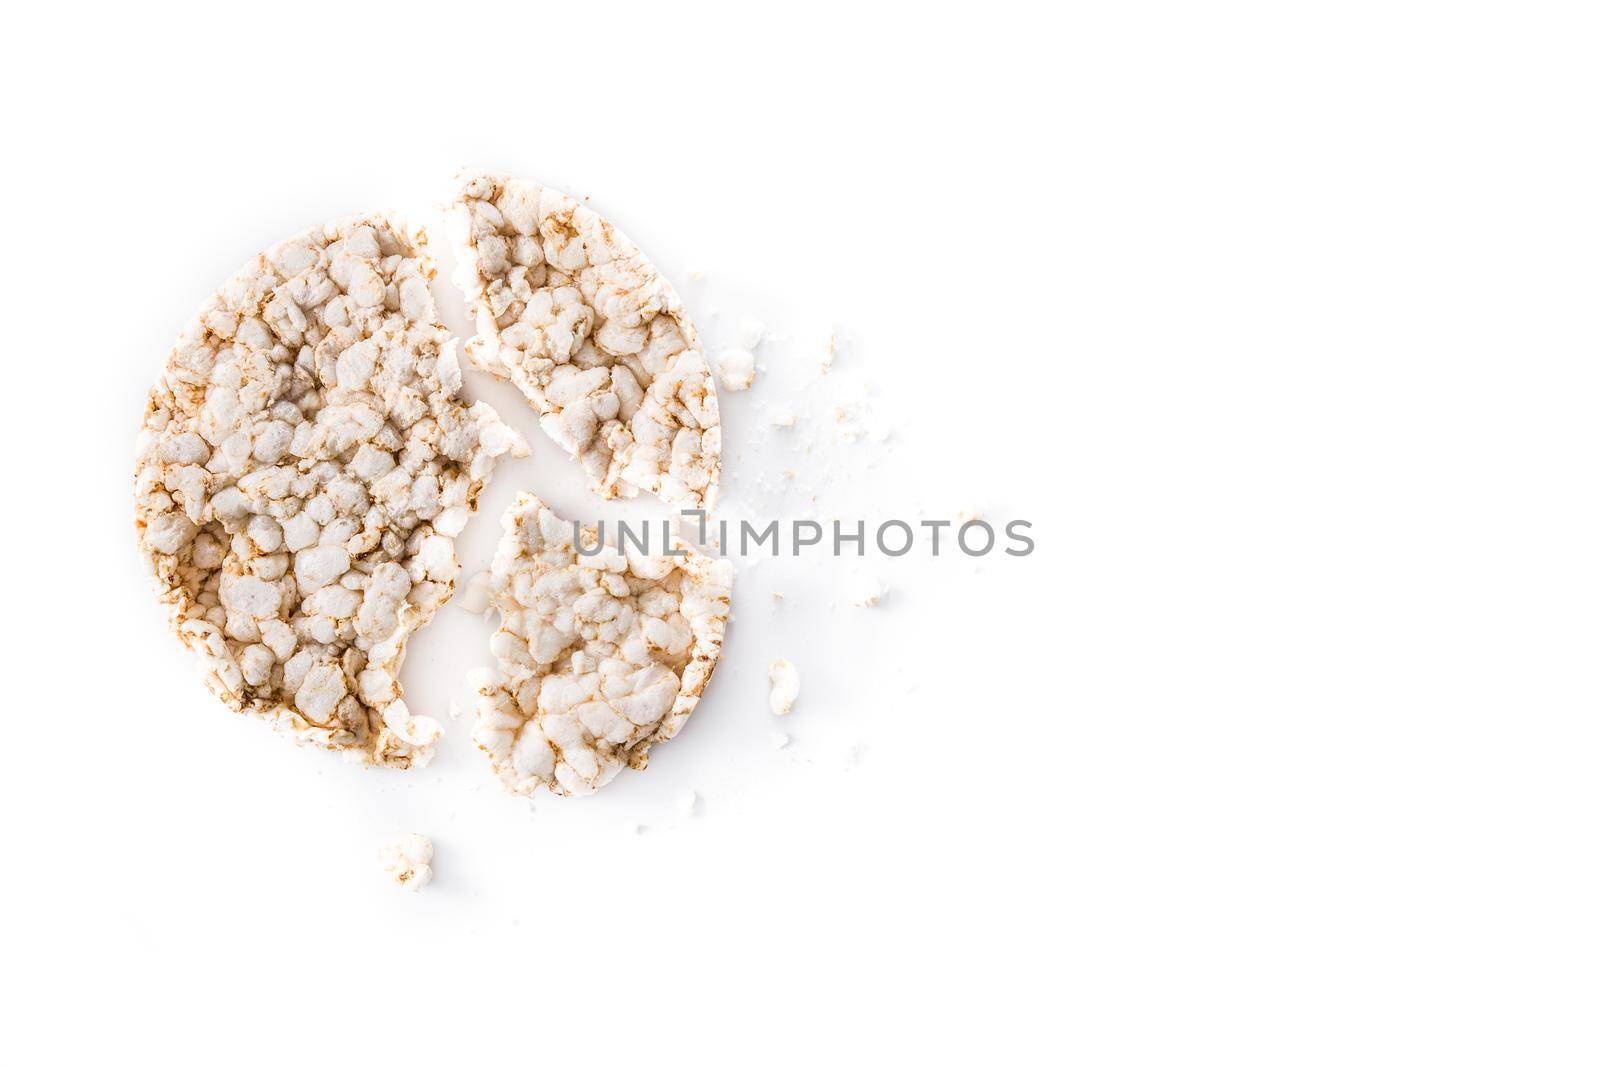 Pile of puffed rice cake isolated on white background